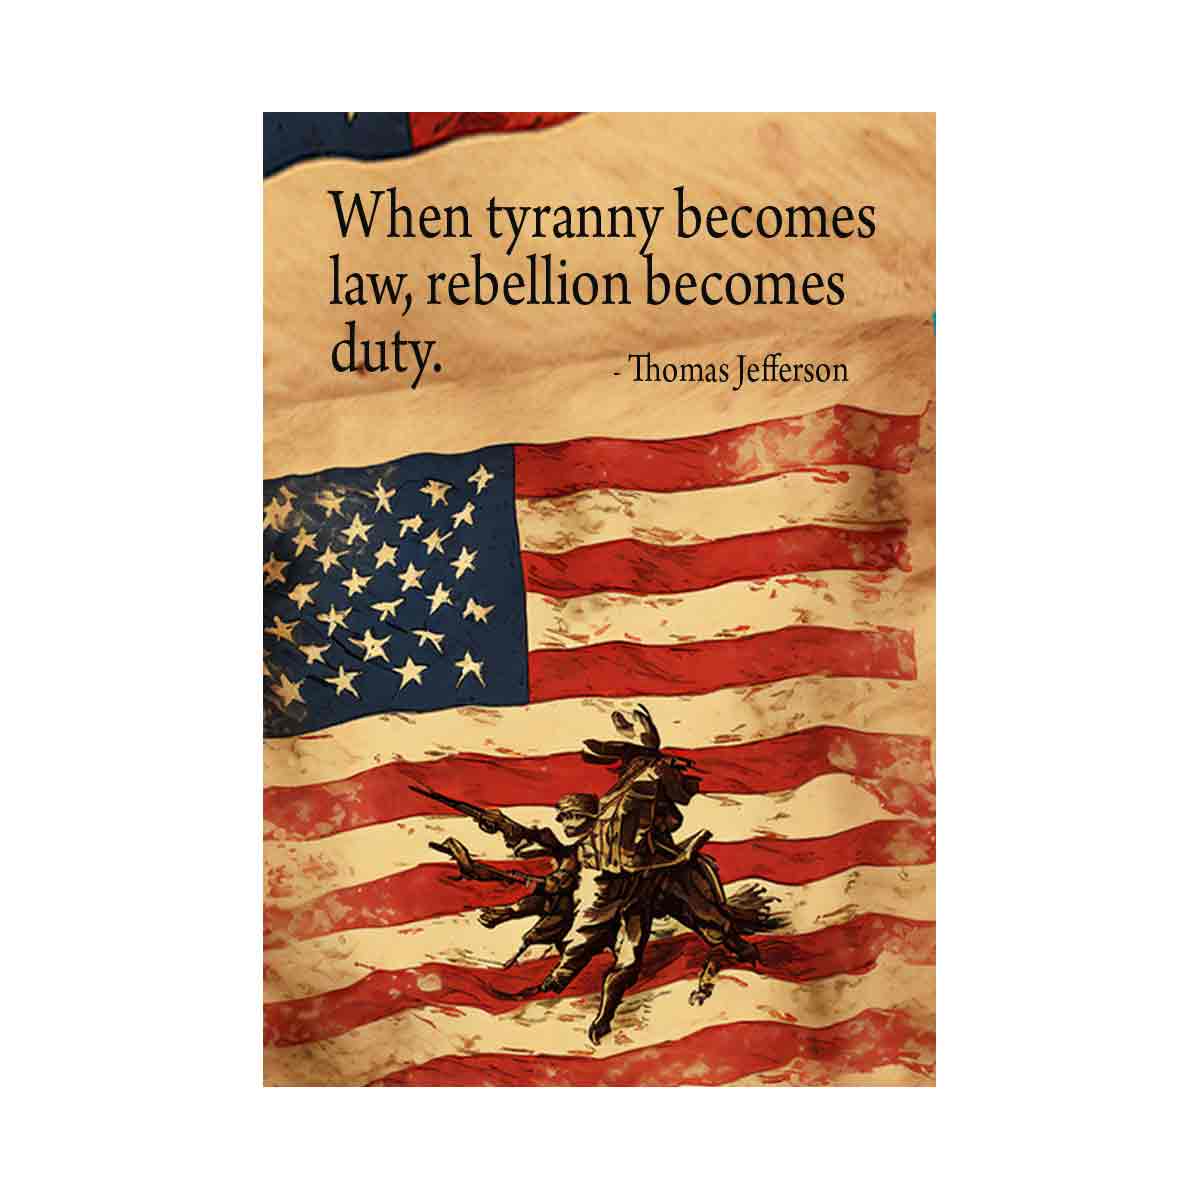 When tyranny becomes law